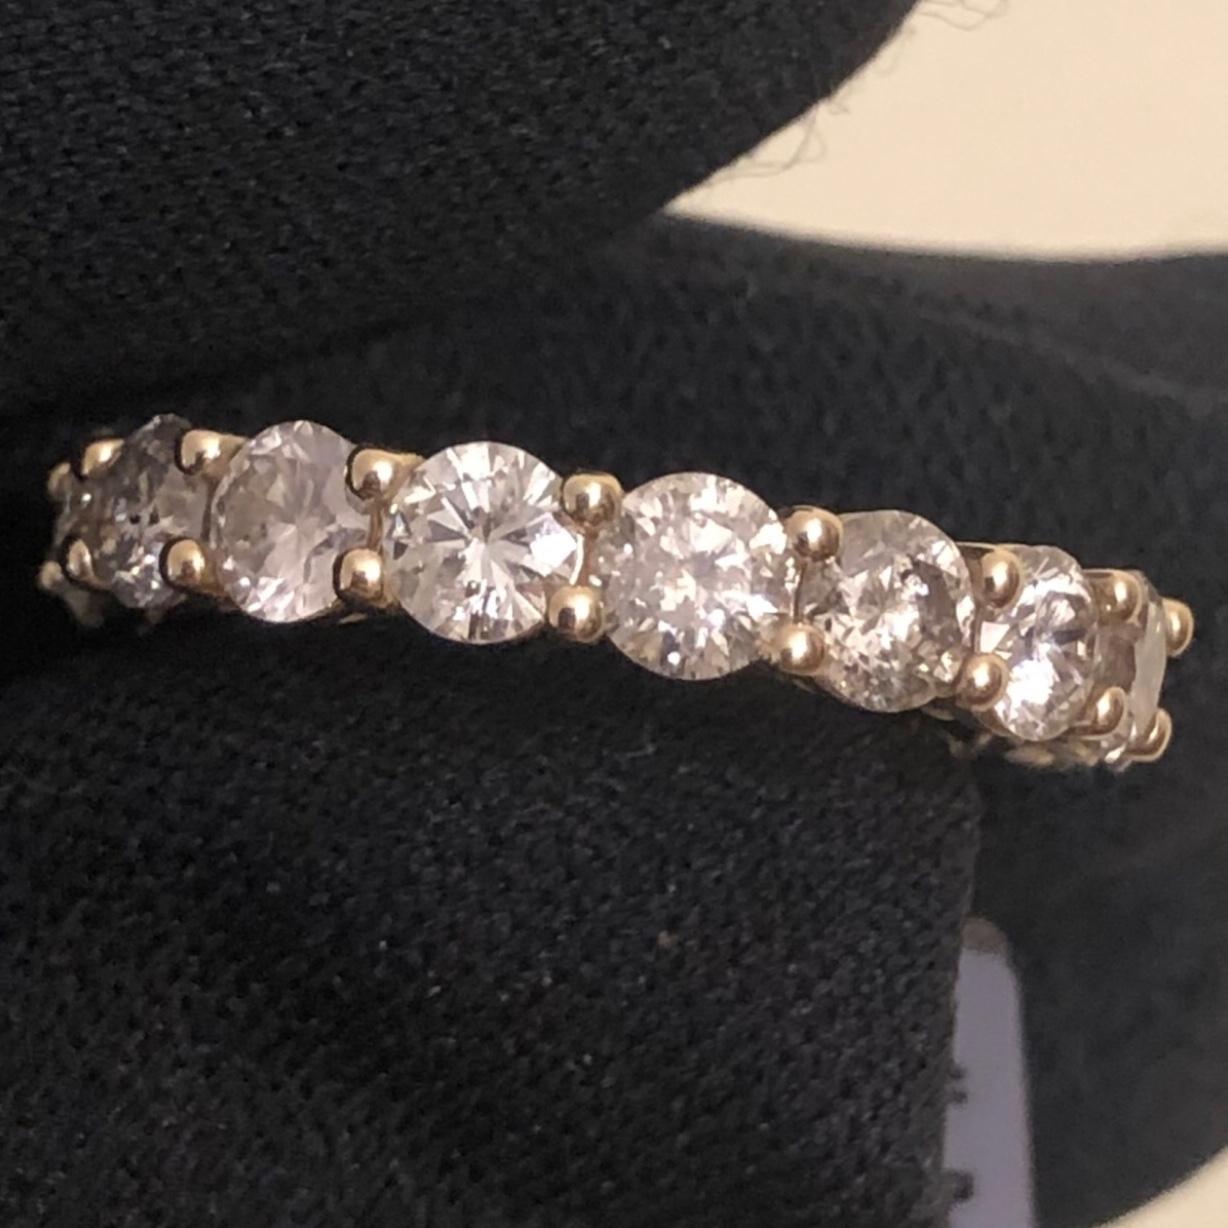 Stunning 3 1/2 carat round diamond full eternity band ring in 14k yellow gold. 17 round SI-I clarity solitaire diamonds are hand set in this full eternity band weighing approx. 3.53 carats.


17 natural 1/5 carat solitaire earth-mined diamonds are